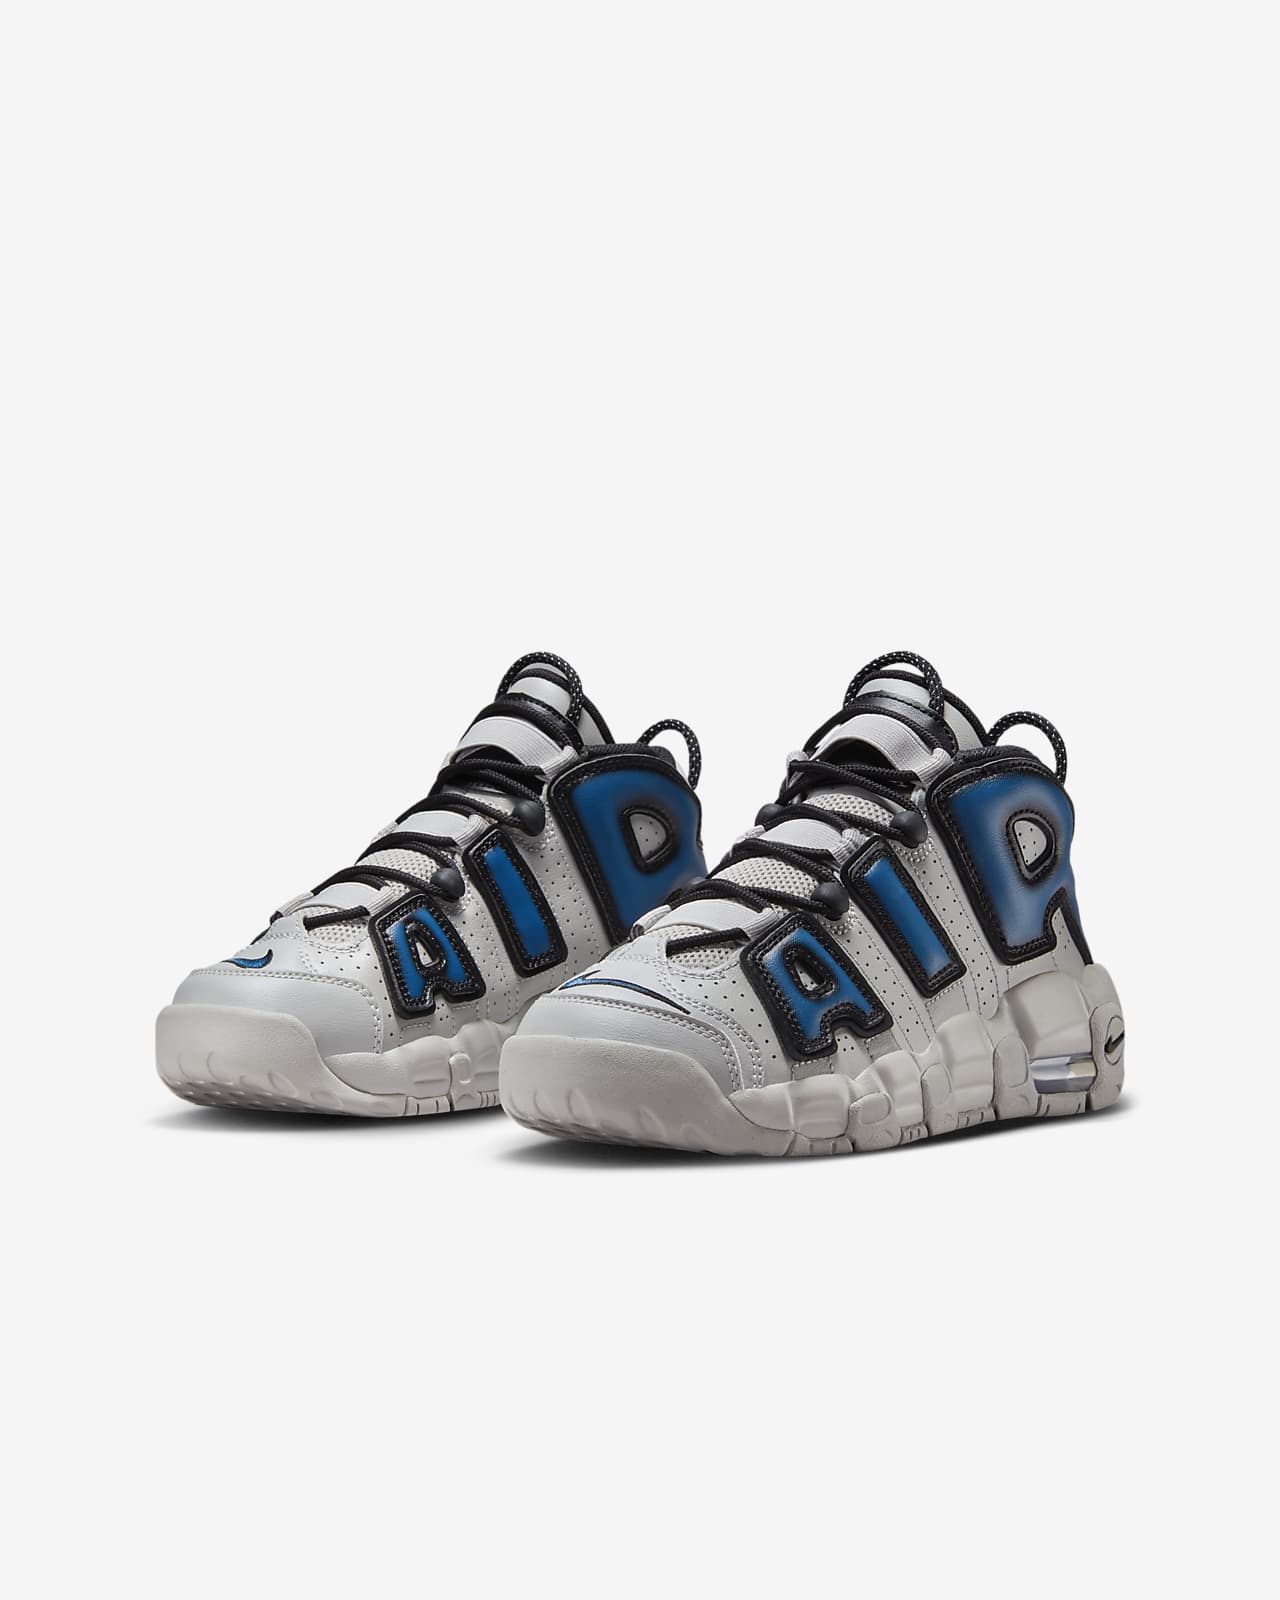 Buy the Nike Air More Uptempo Tri-Color 6.5Y